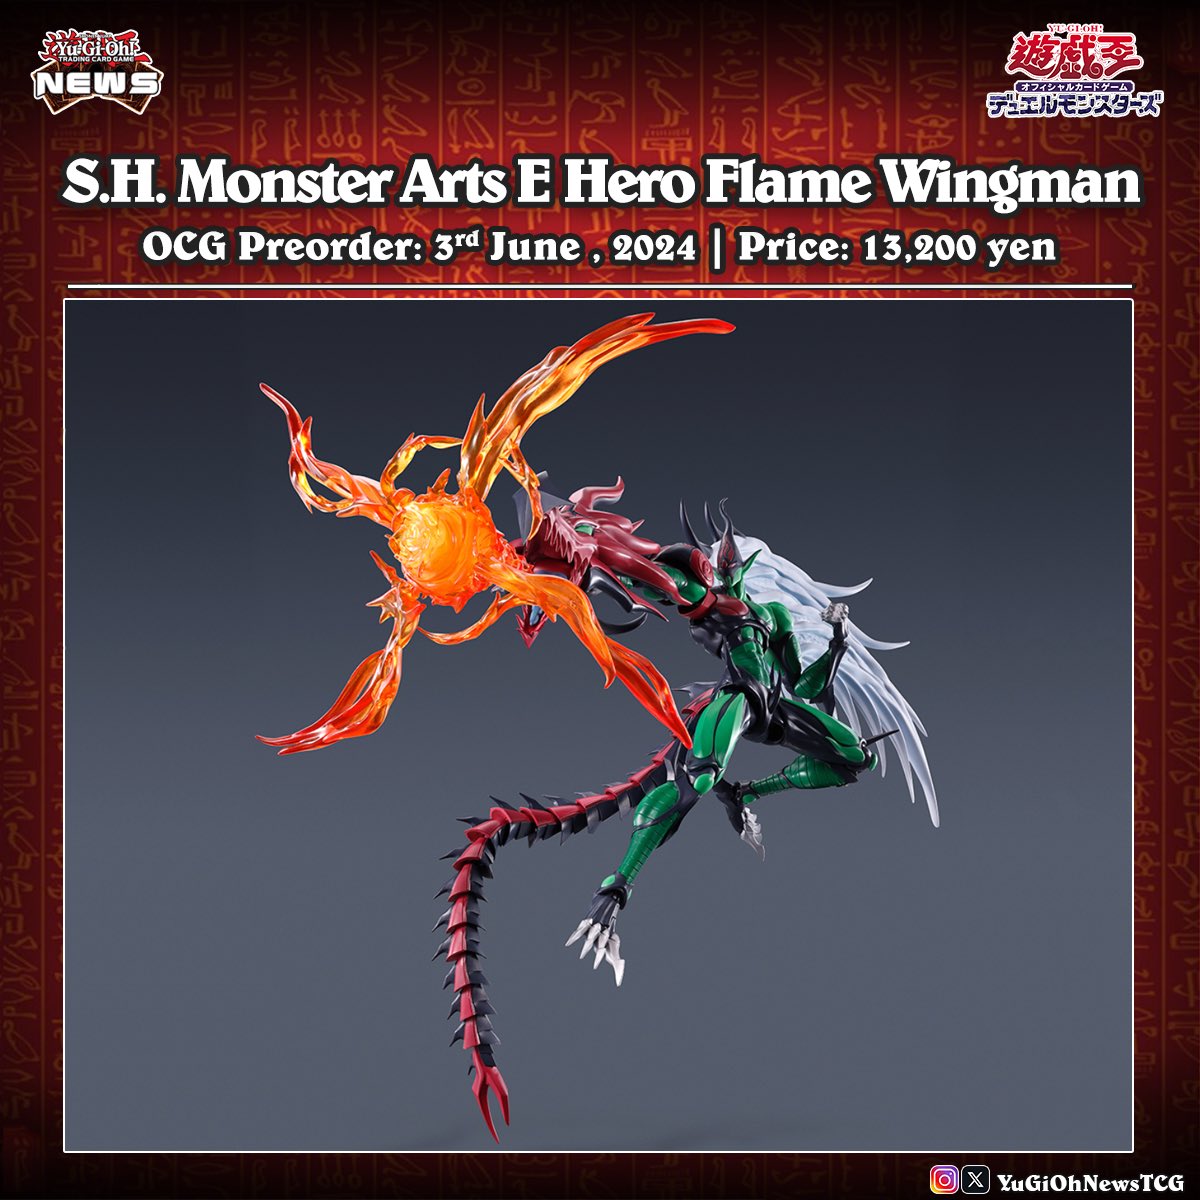 ❰𝗬𝘂𝗚𝗶𝗢𝗵 𝗙𝗶𝗴𝘂𝗿𝗲❱
S.H. Monster Arts has released more official images of the upcoming 'Elemental HERO Flame Wingman' figure❗️🏙️🔥

@TamashiiUk @TamashiiNations #遊戯王 #YuGiOh #유희왕